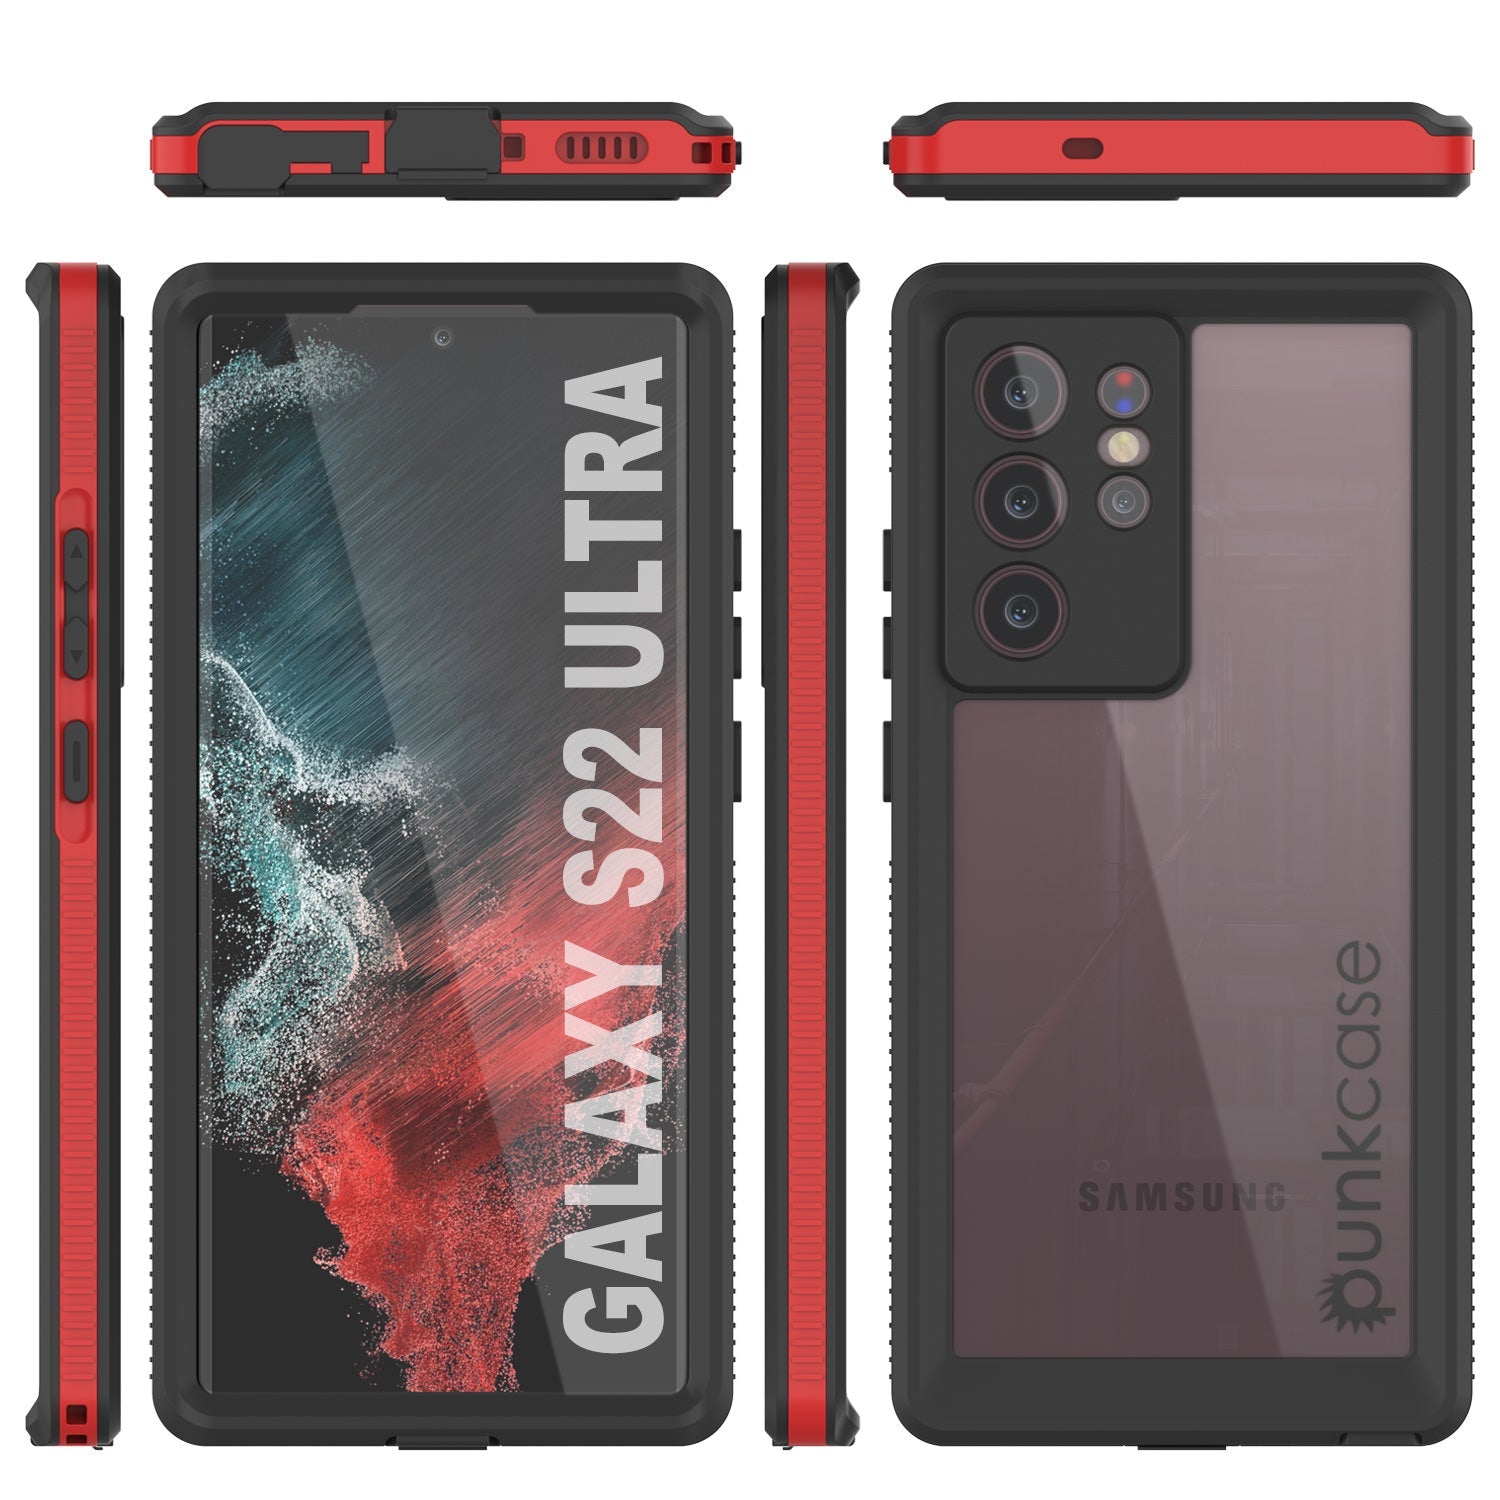 Galaxy S22 Ultra Waterproof Case PunkCase Ultimato Red Thin 6.6ft Underwater IP68 Shock/Snow Proof [Red]